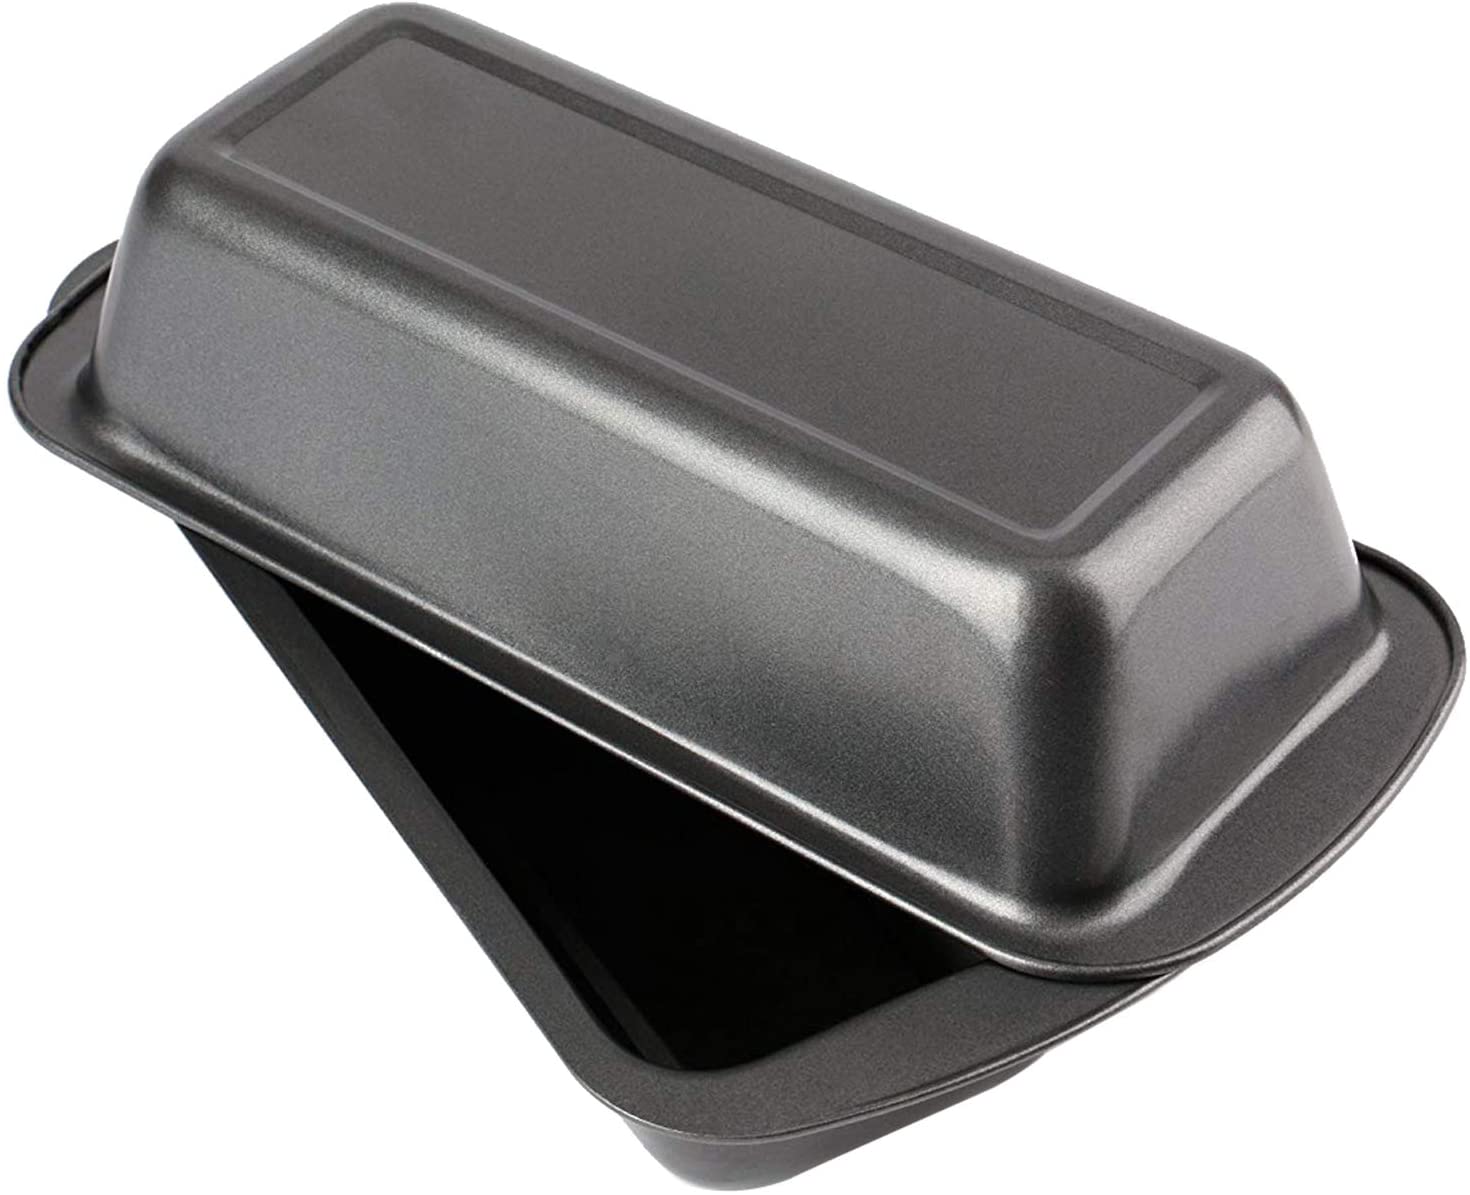 Tosnail 2 Pack Non-stick Bread Loaf Pan - Small - e4cents